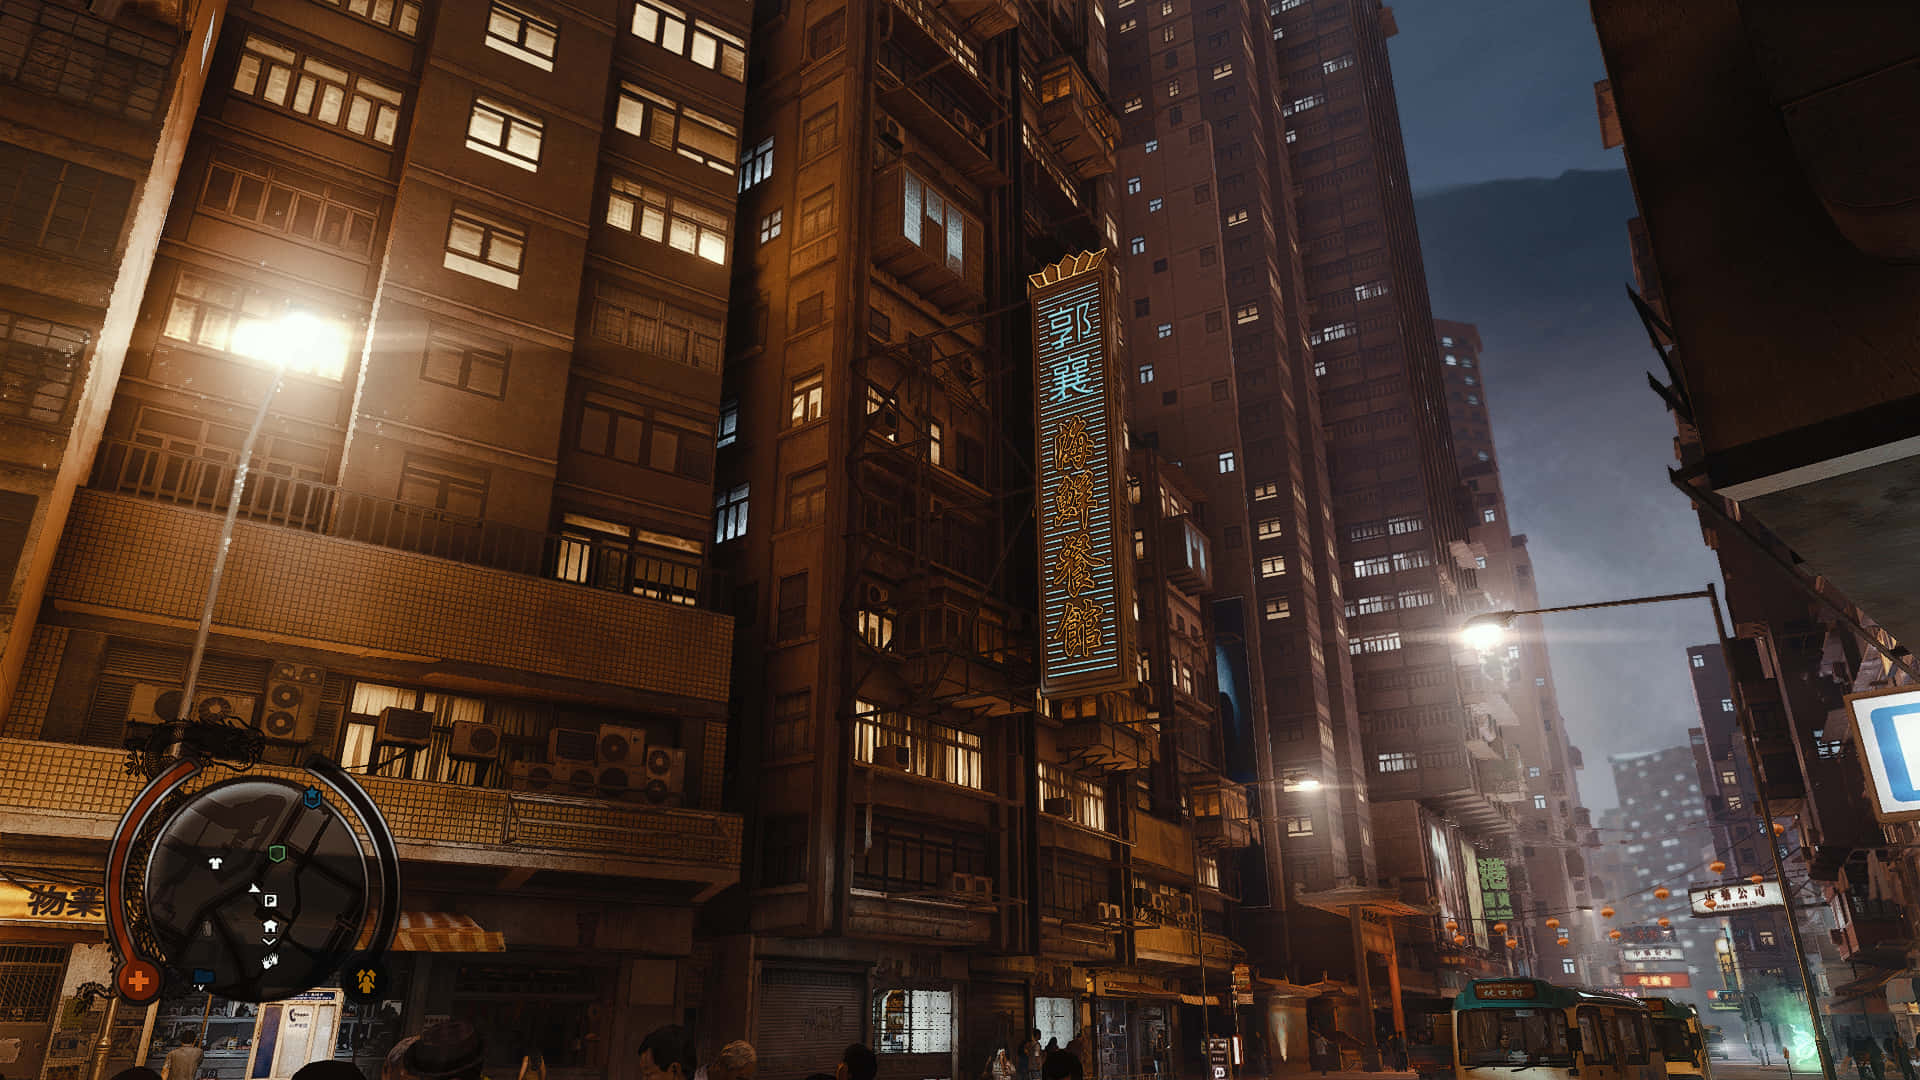 Explore the vibrant city of Hong Kong in Sleeping Dogs